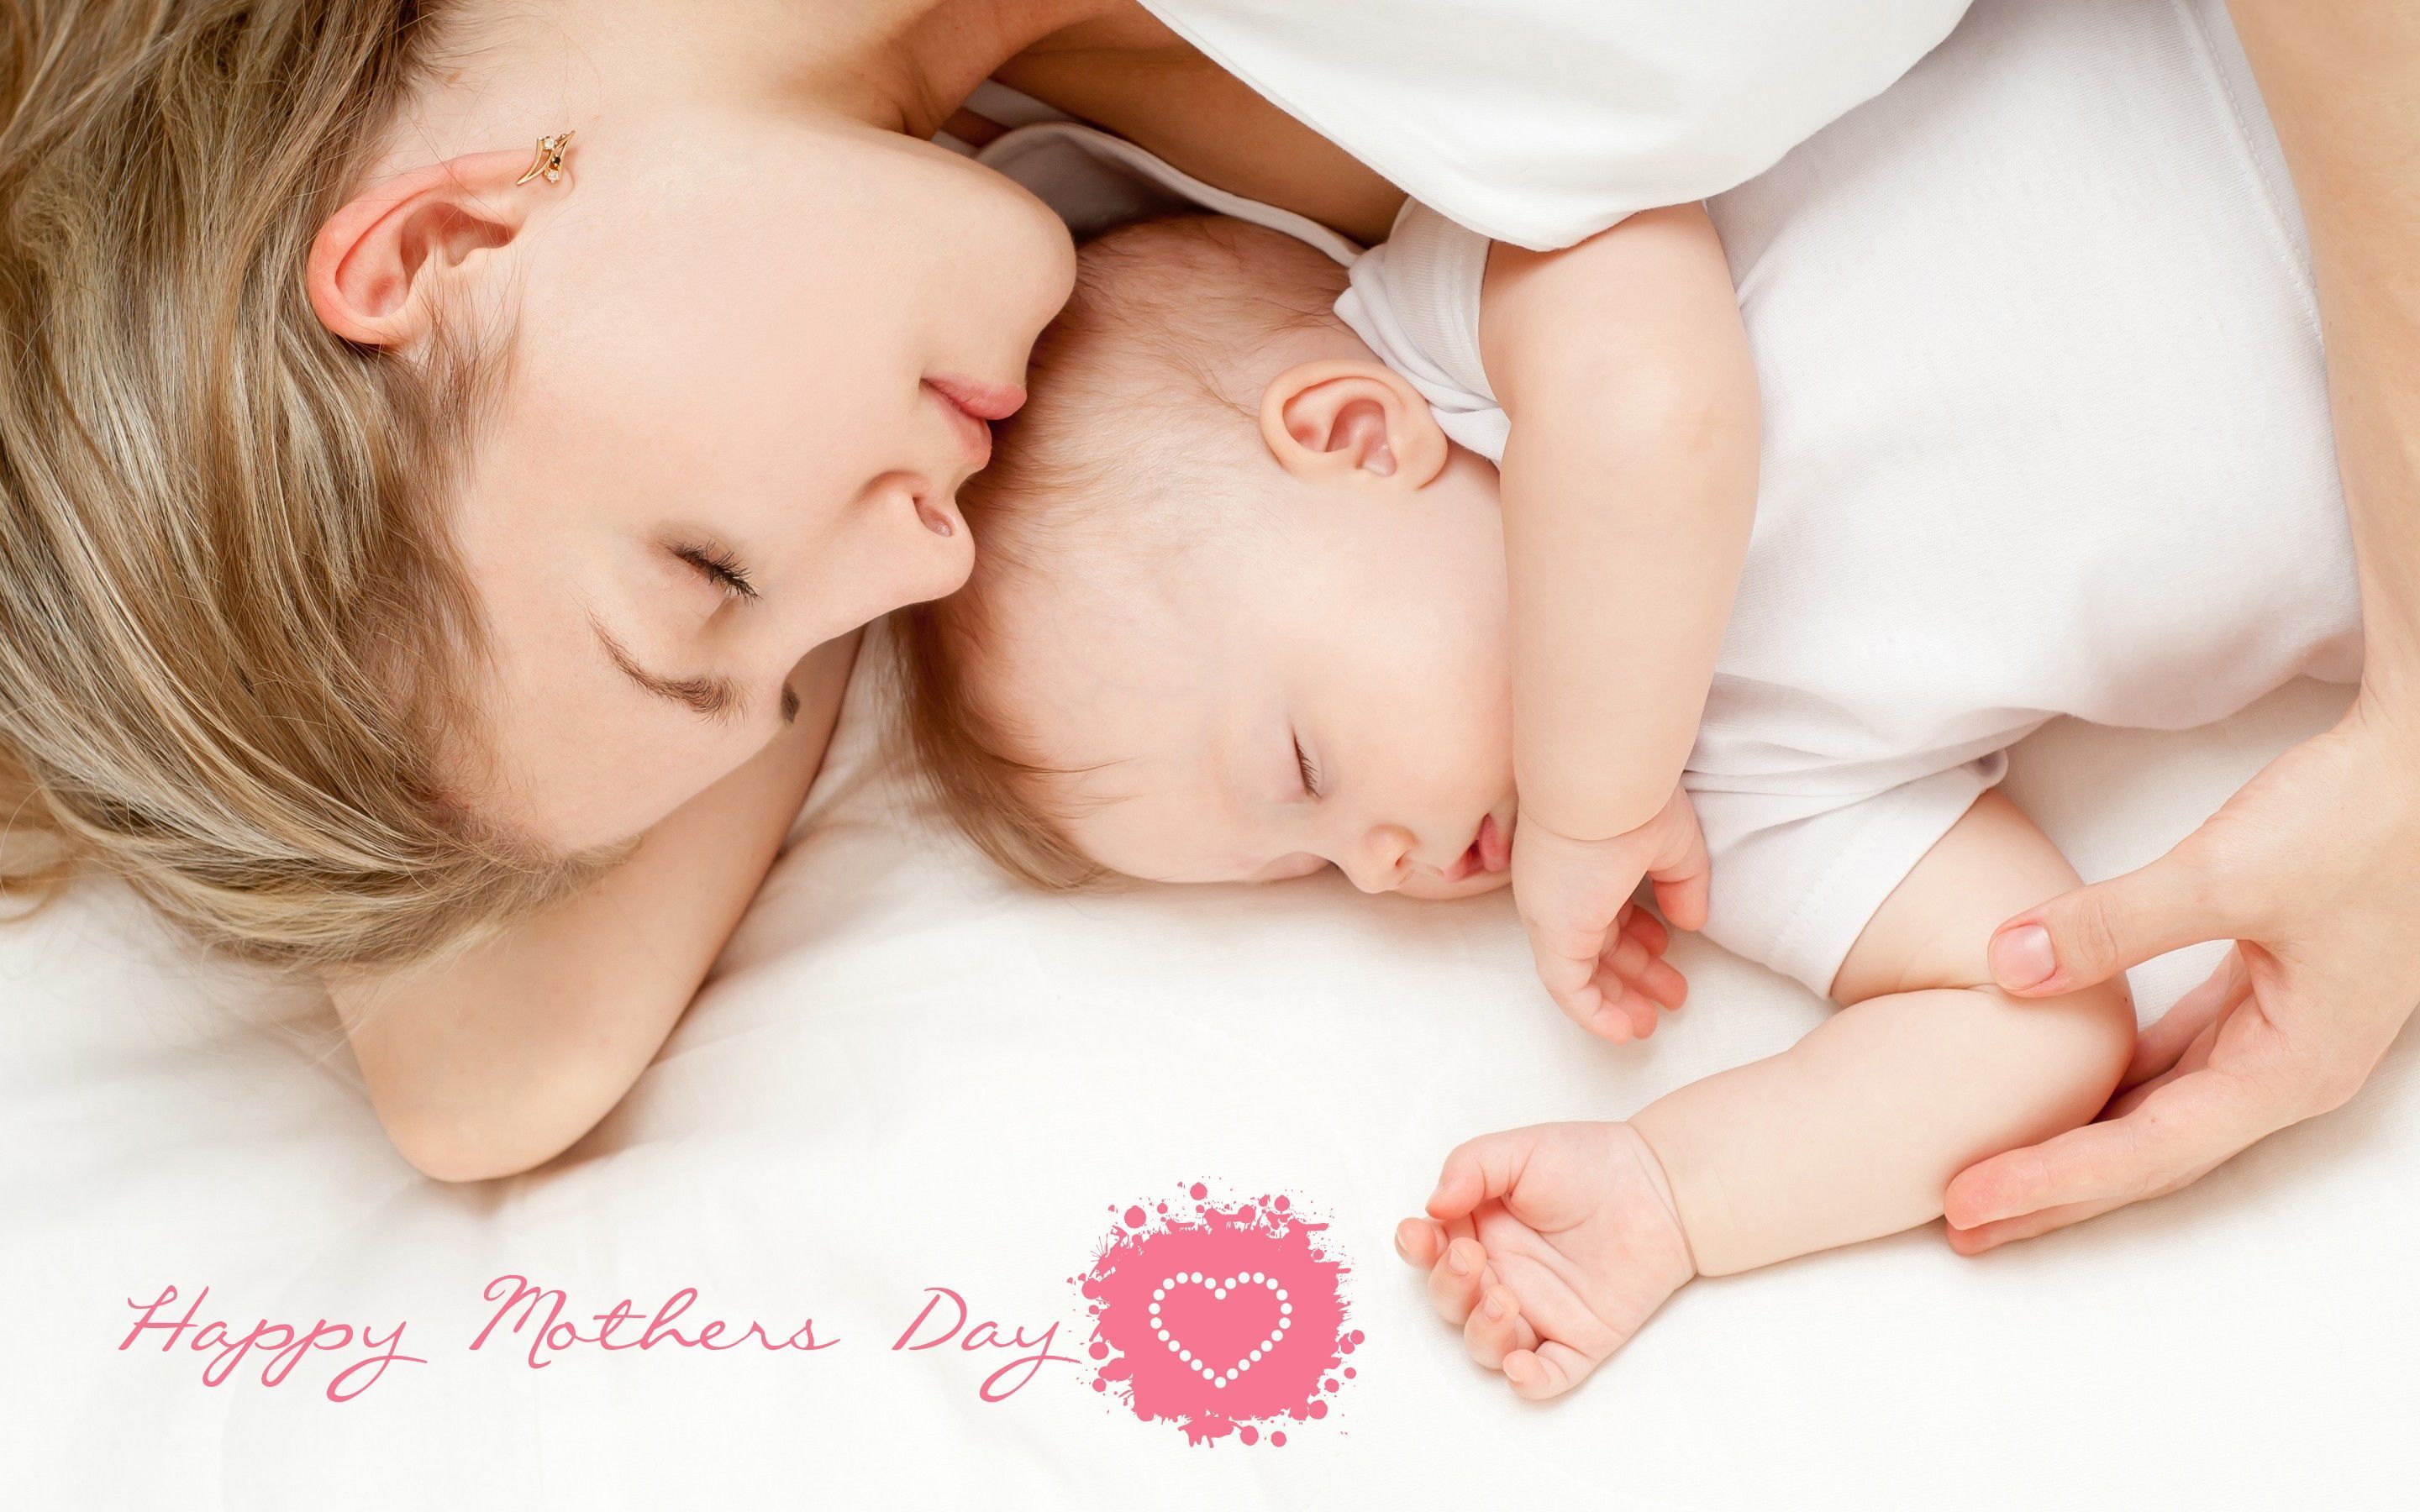 Beautiful Mothers Quotes for Mothers Day Wallpapers - Zibrato